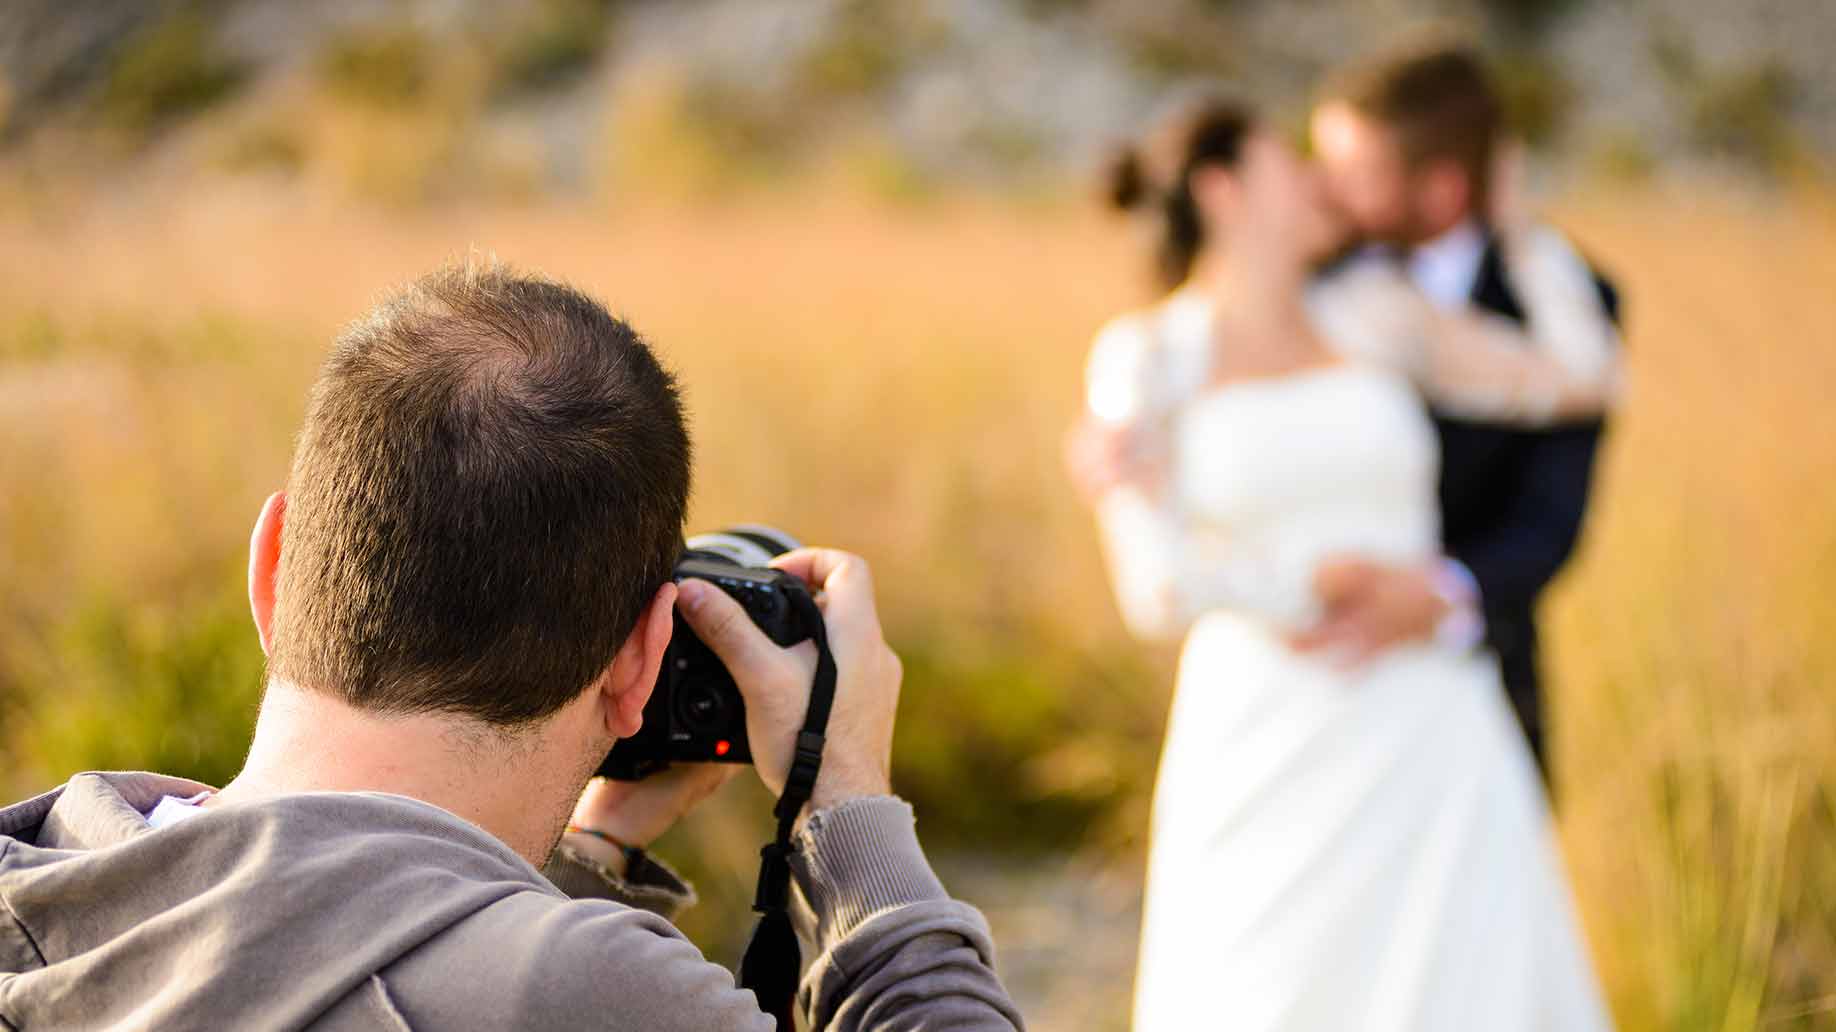 photographer cost prices packages much does couple